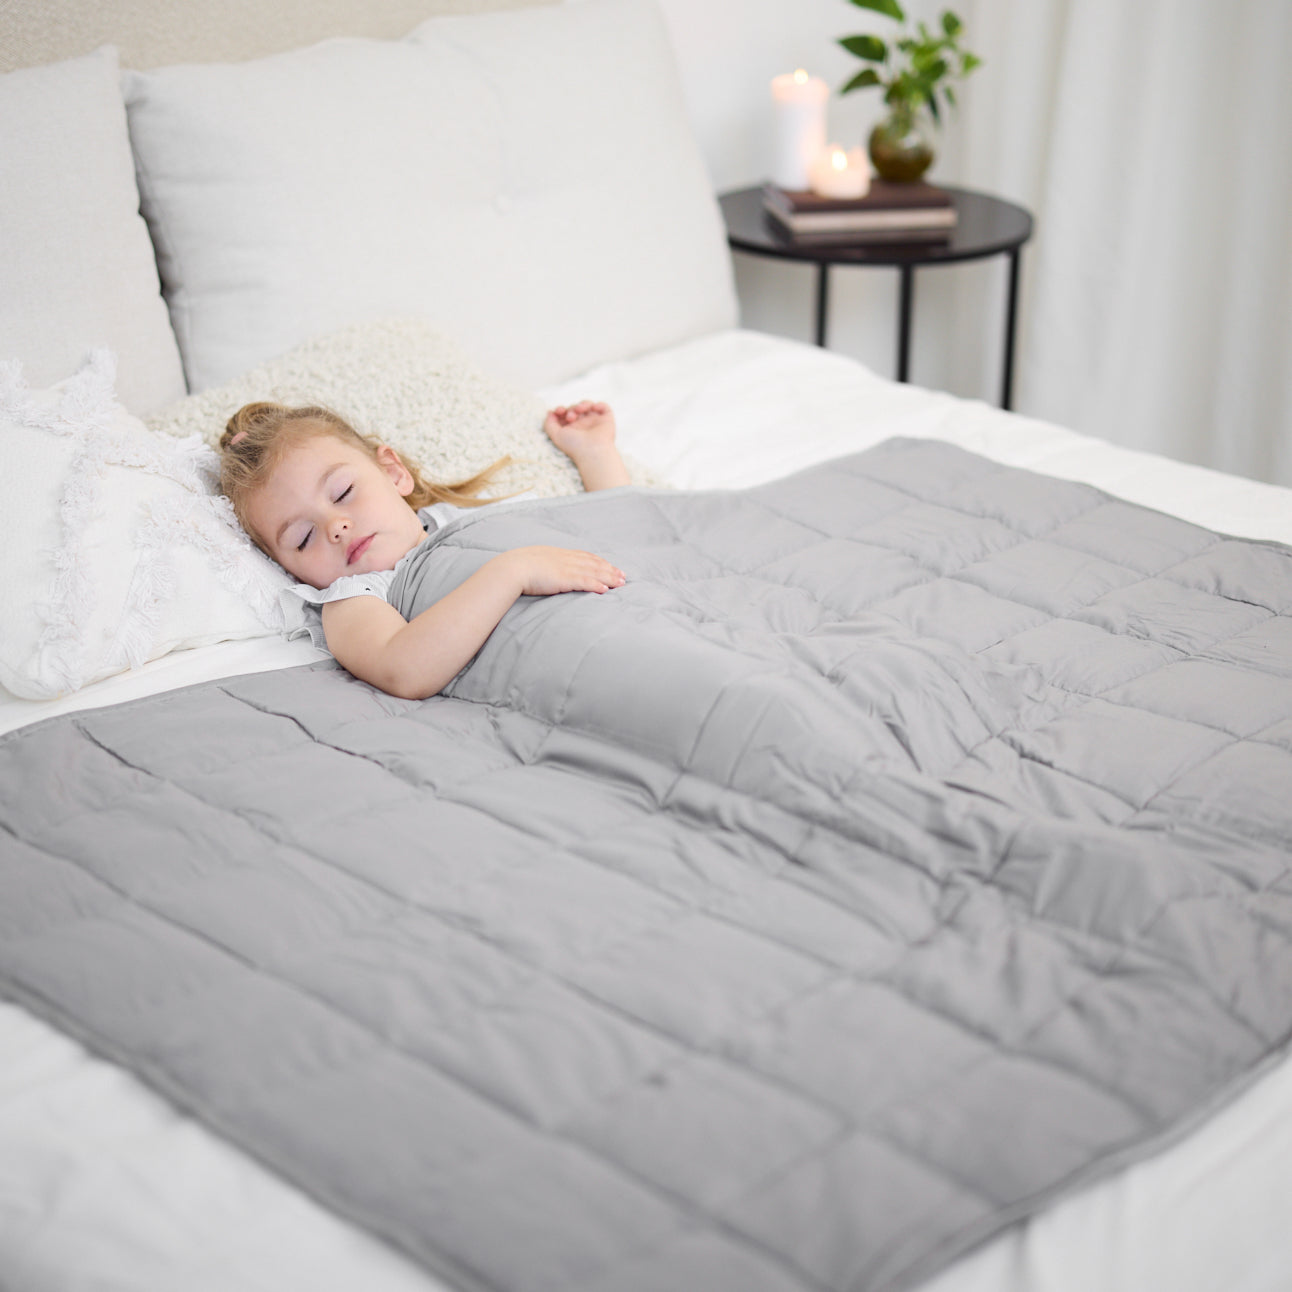 sherpa toddler-bed weighted blanket 2.65 lbs